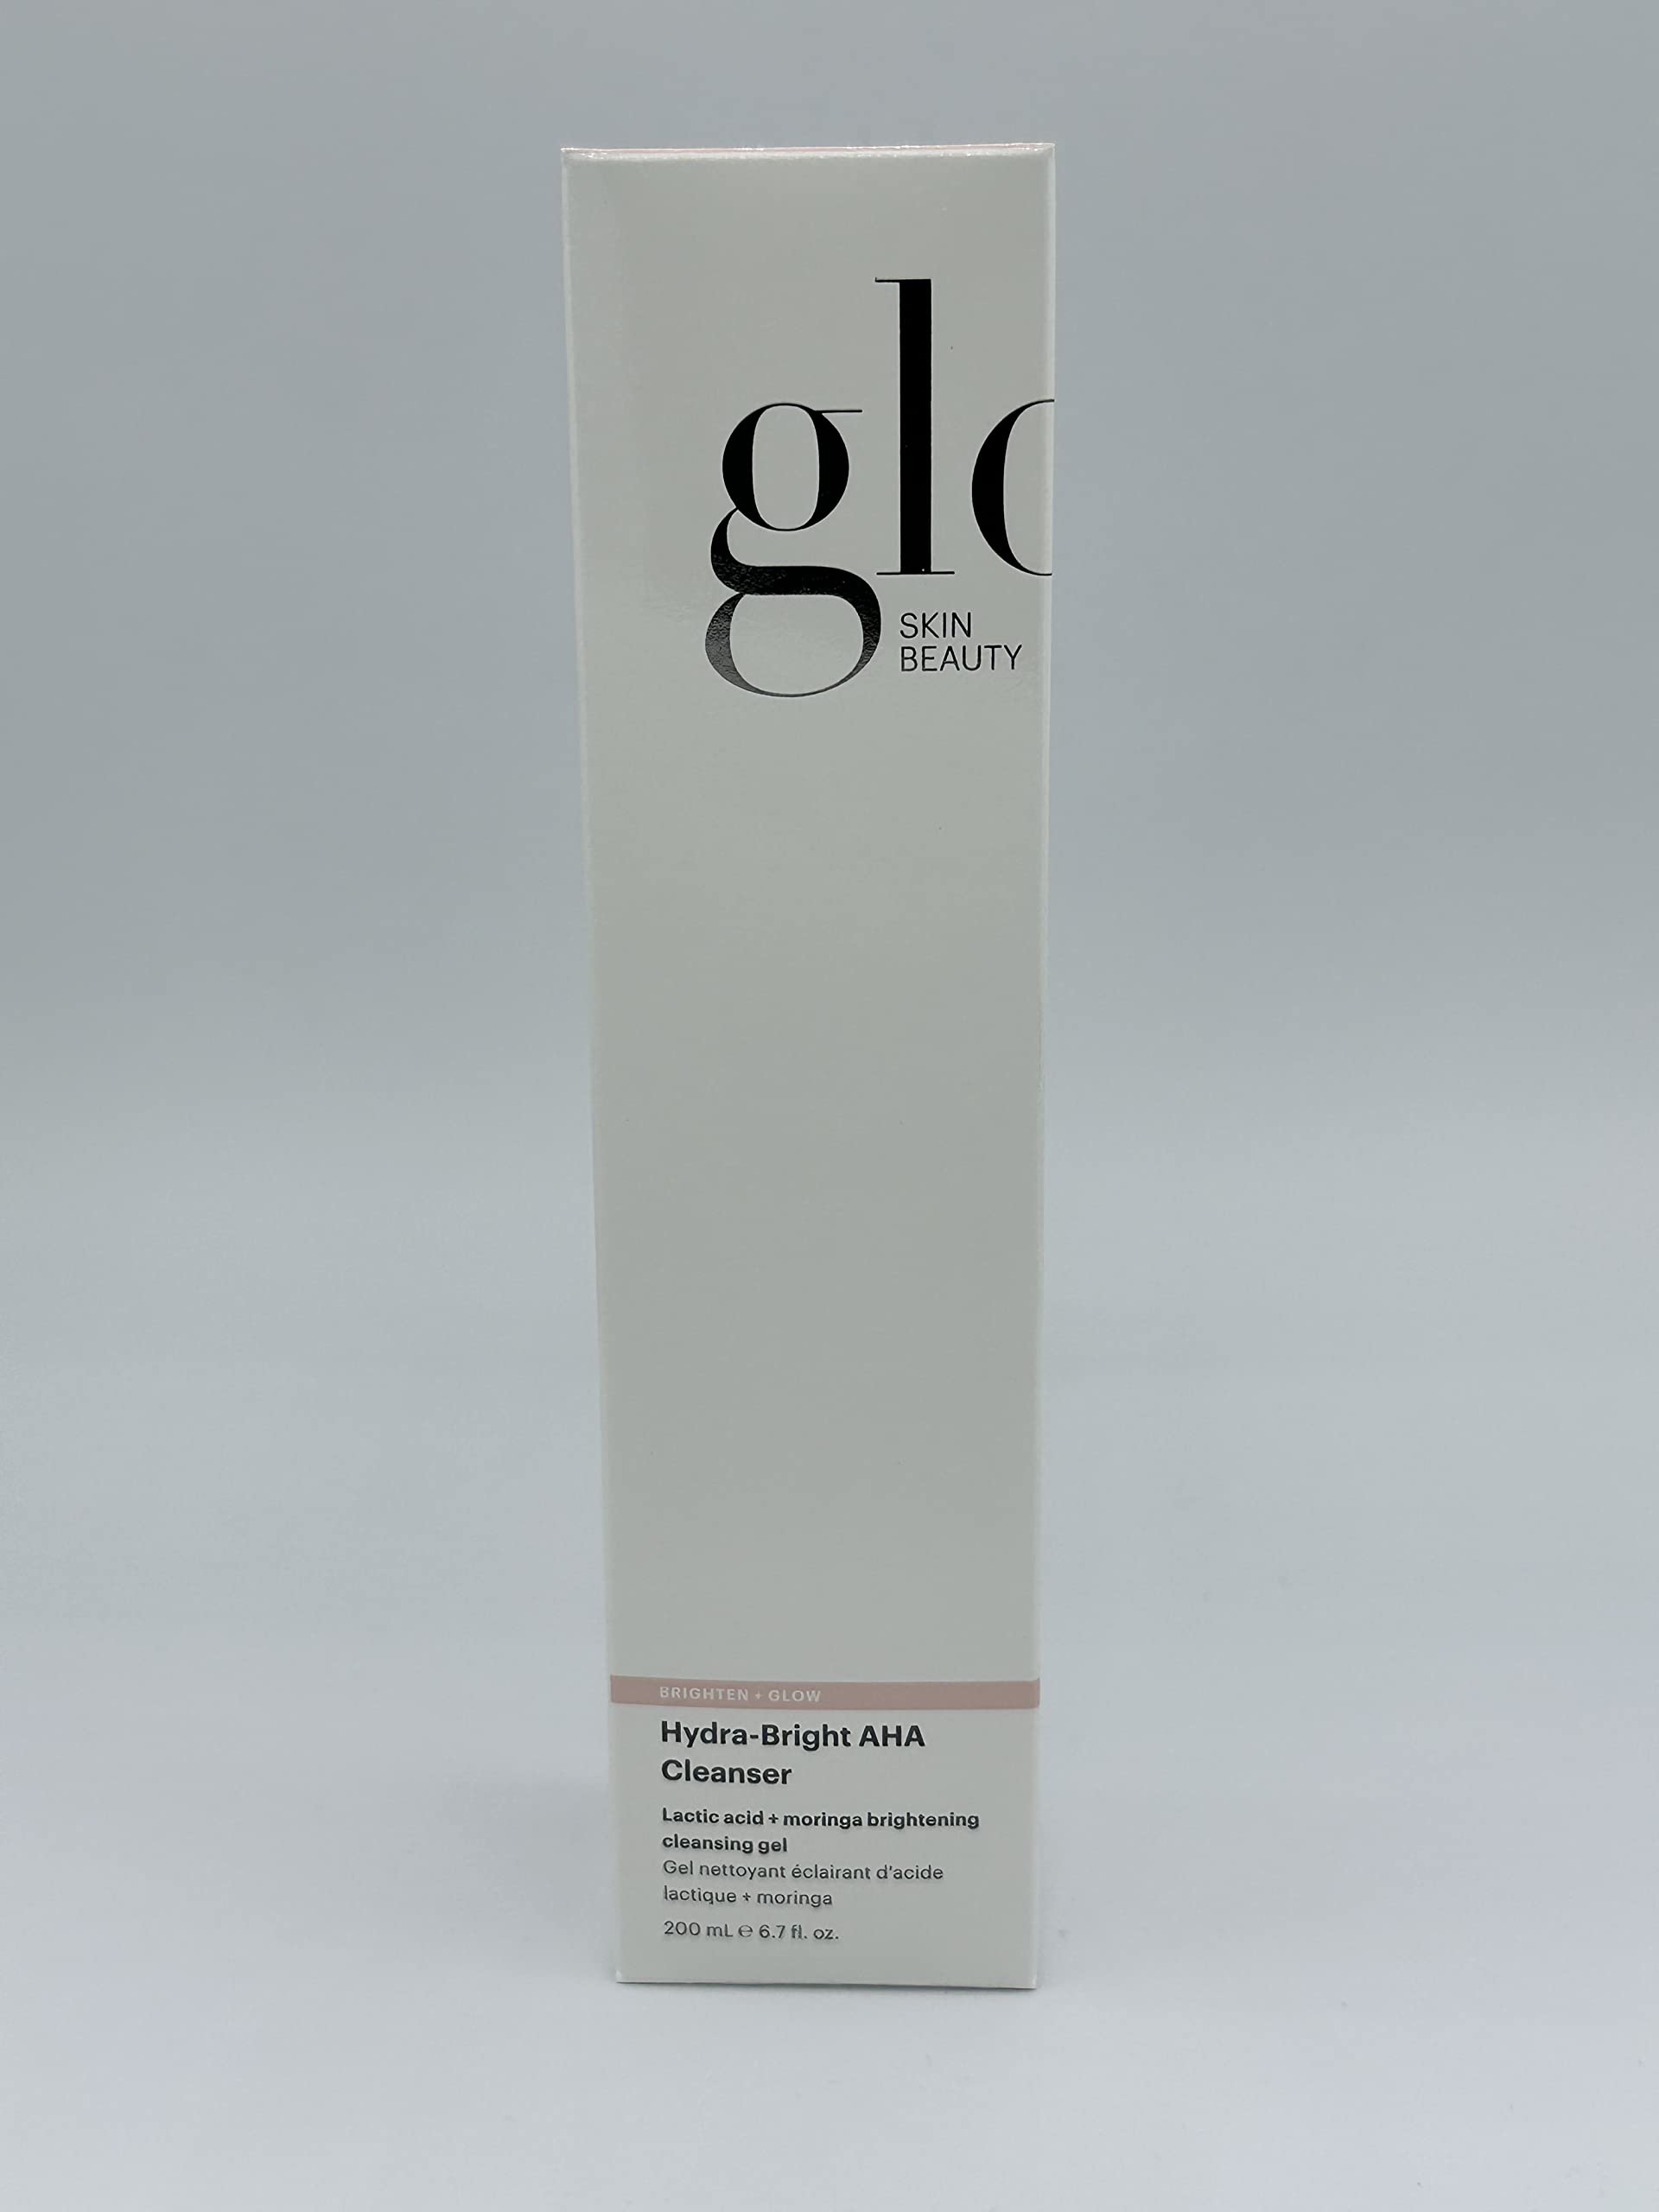 Glo Skin Beauty Hydra-Bright AHA Cleanser | Foaming Gel Cleanser Removes Makeup, Gently Exfoliates, Hydrates and Brightens Skin (6.7 Fl Oz)